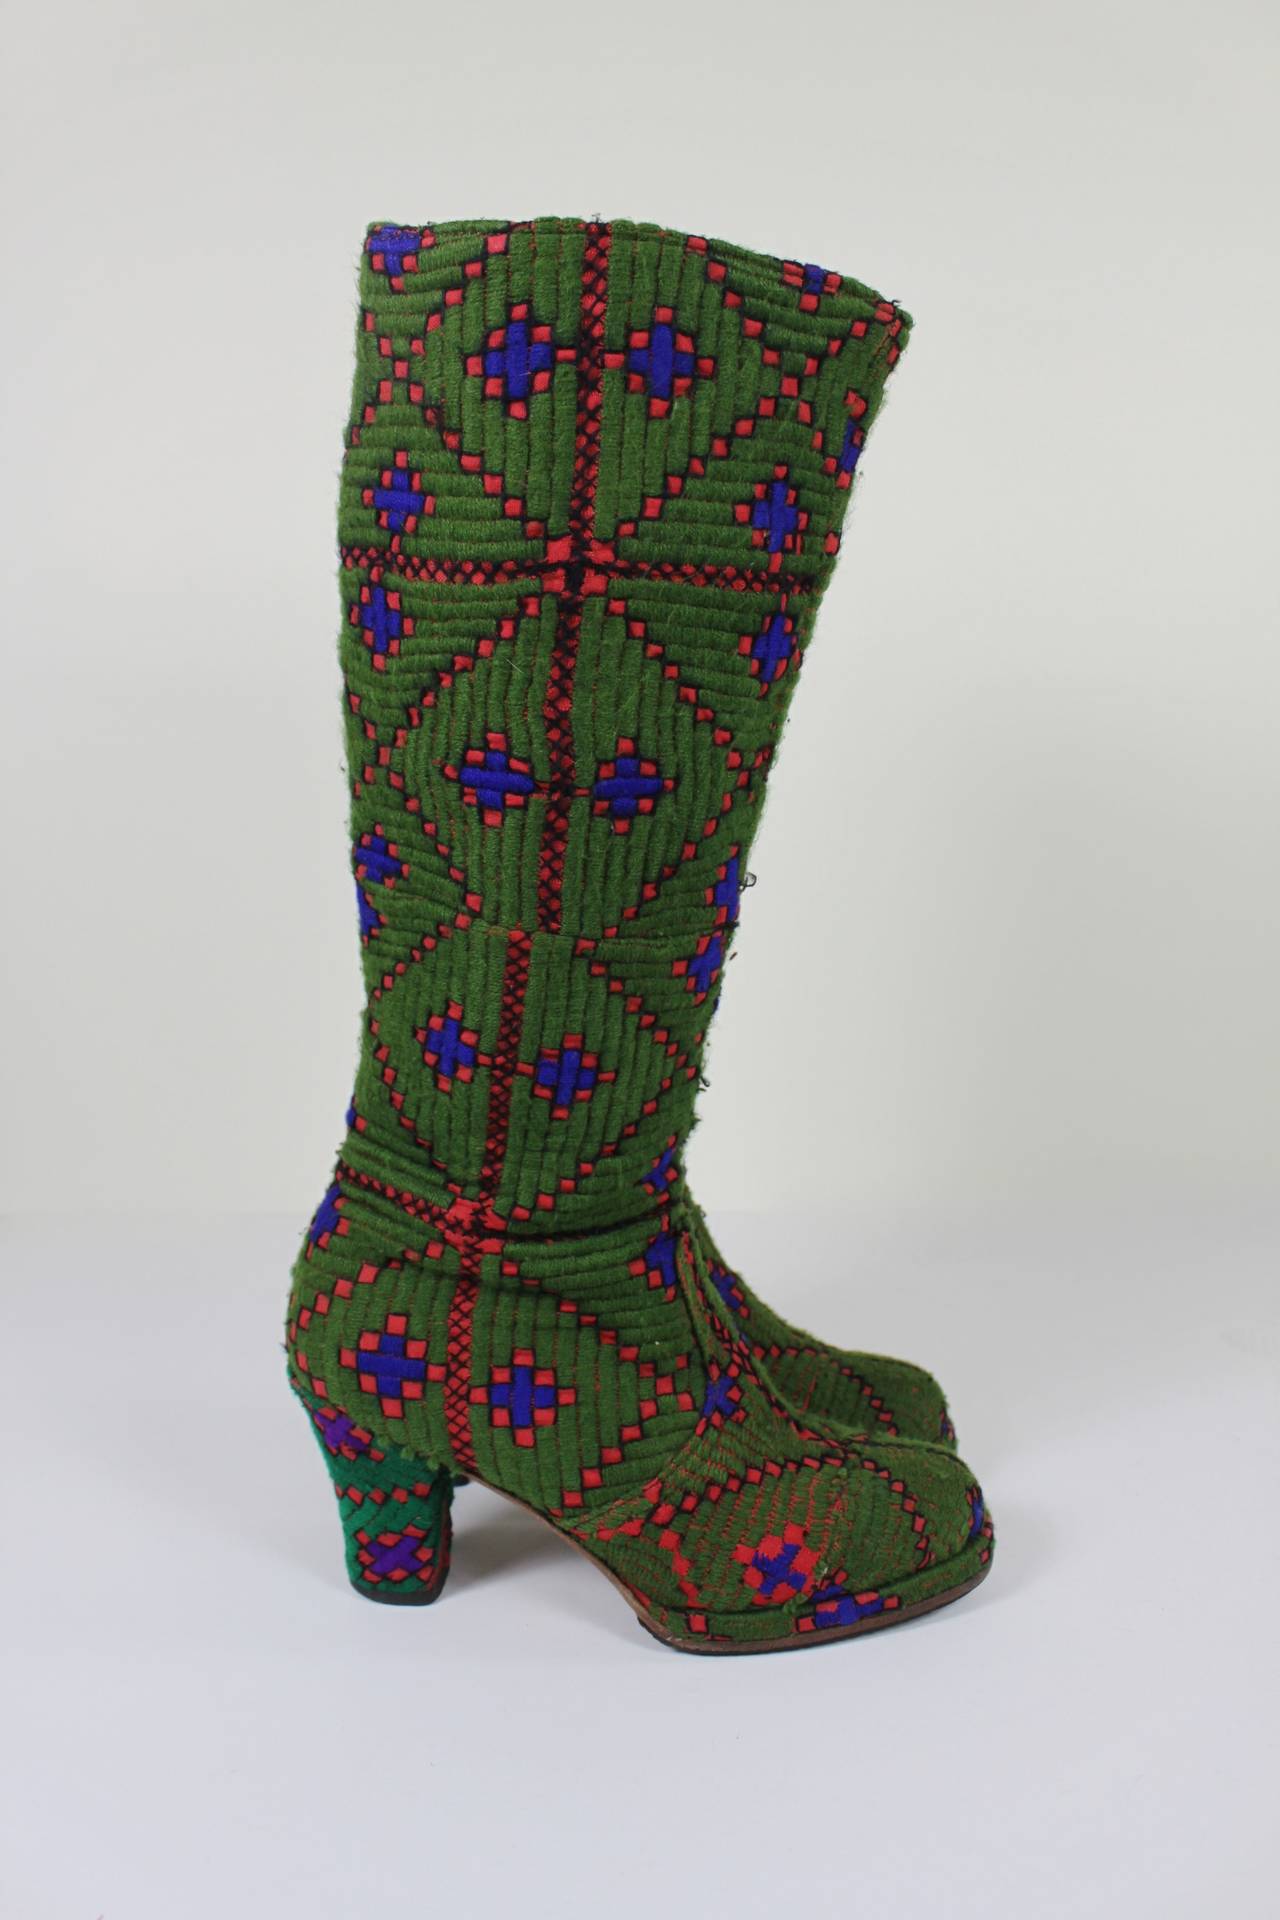 Women's 1960s Ethnic Inspired Embroidered Platform Boots